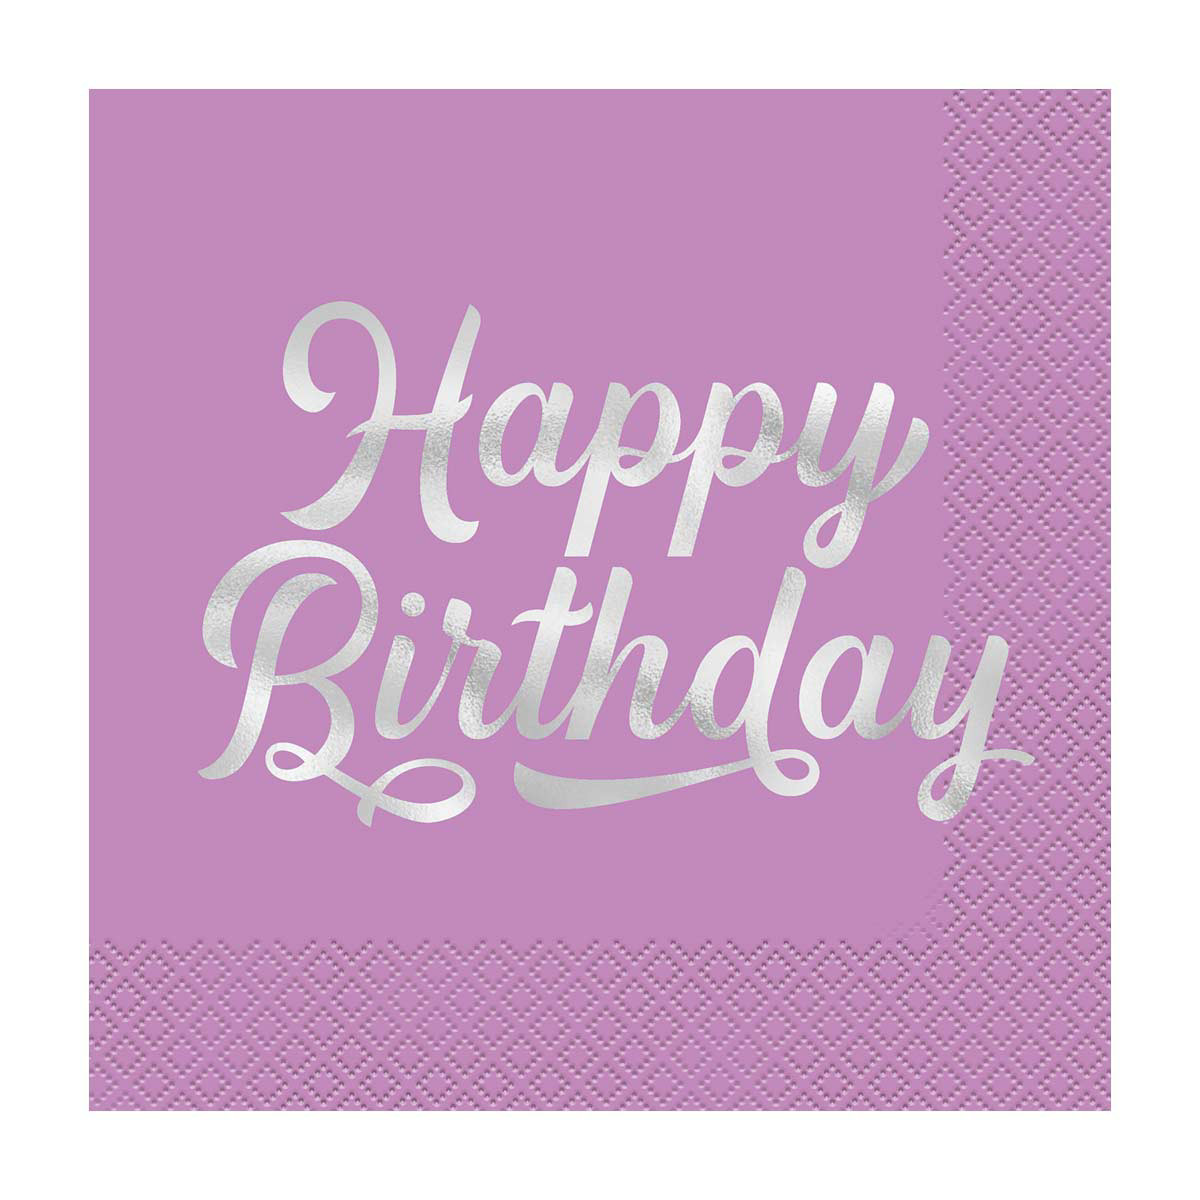 Foil Trimmed Birthday Luncheon Napkins, 16 ct